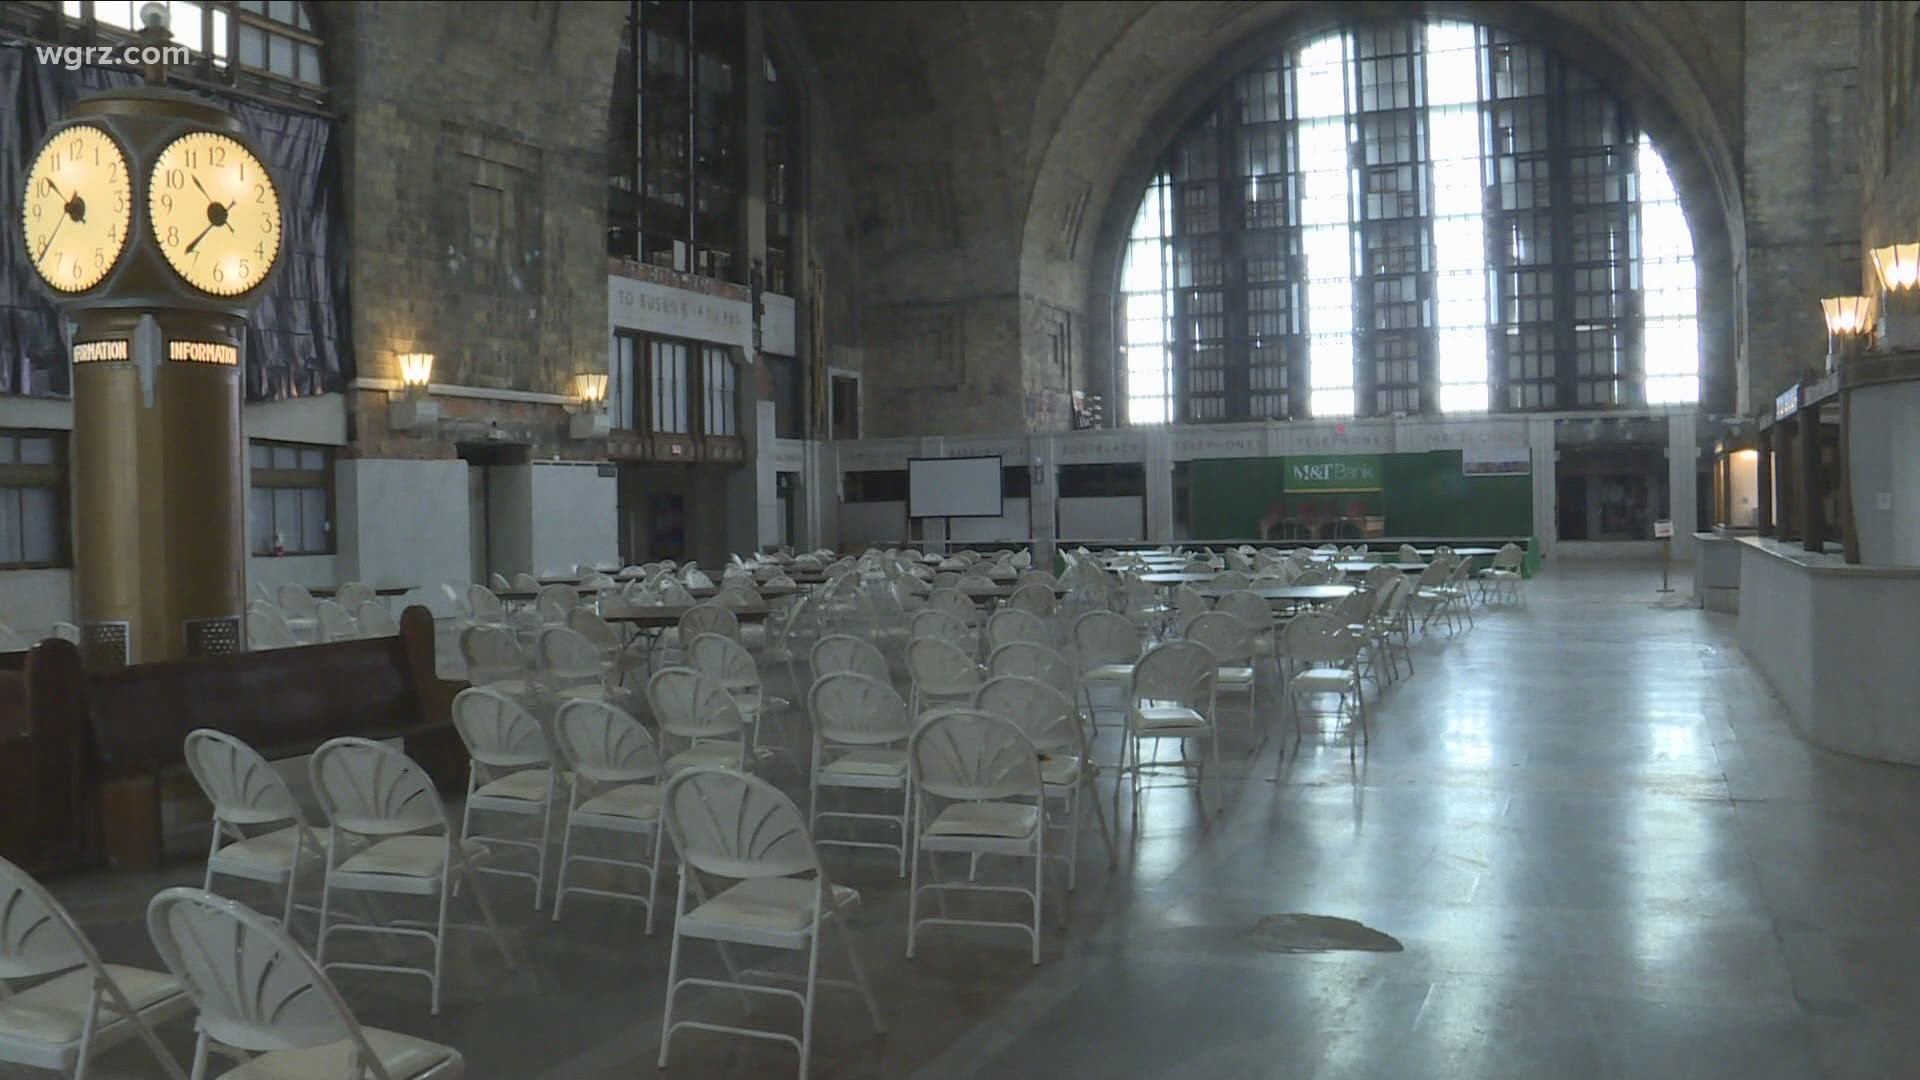 Updates coming to the Central Terminal